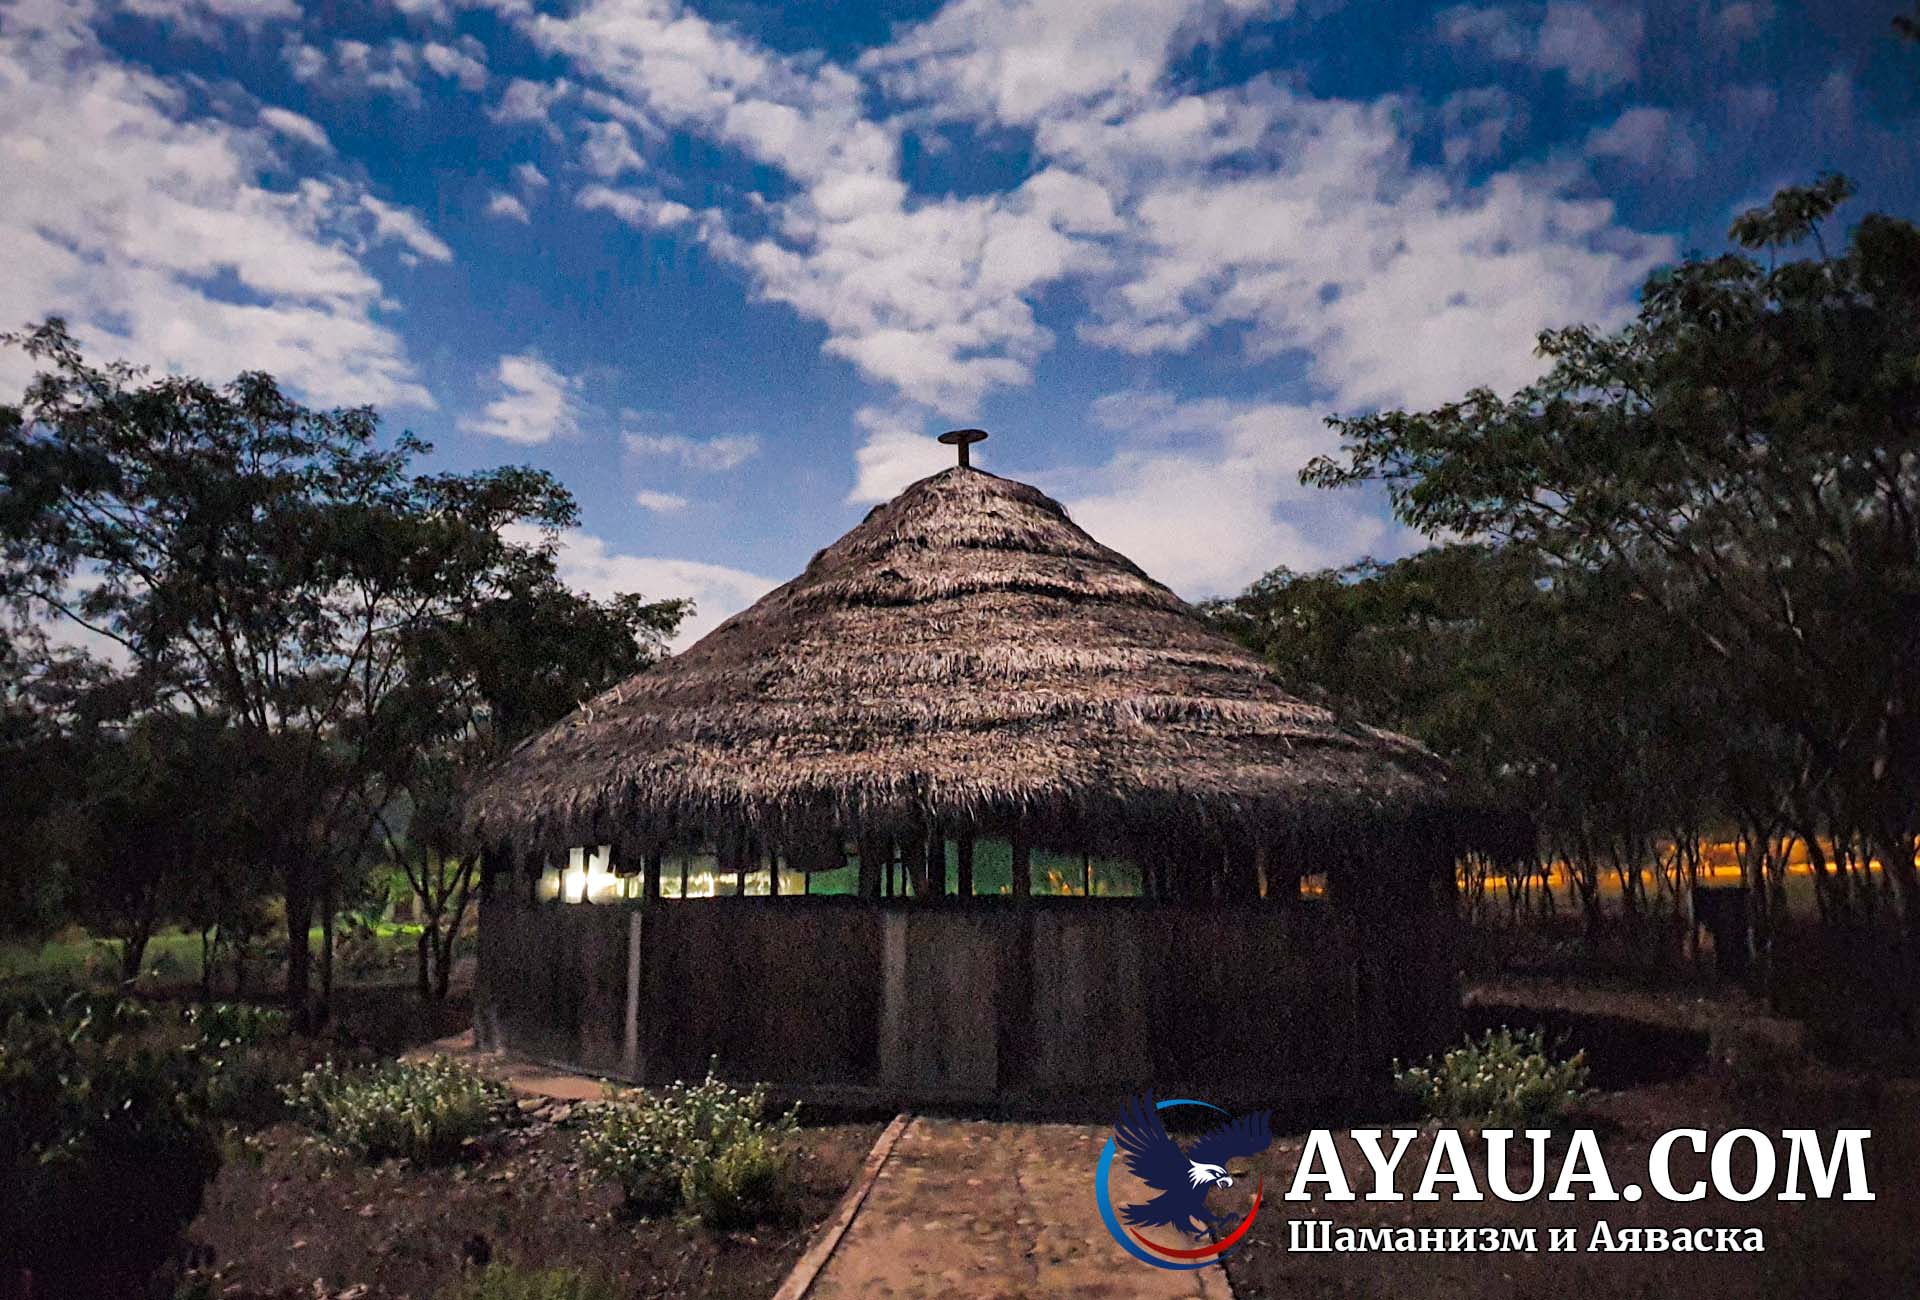 An Indian maloka where Ayahuasca shamanic ceremonies are performed.